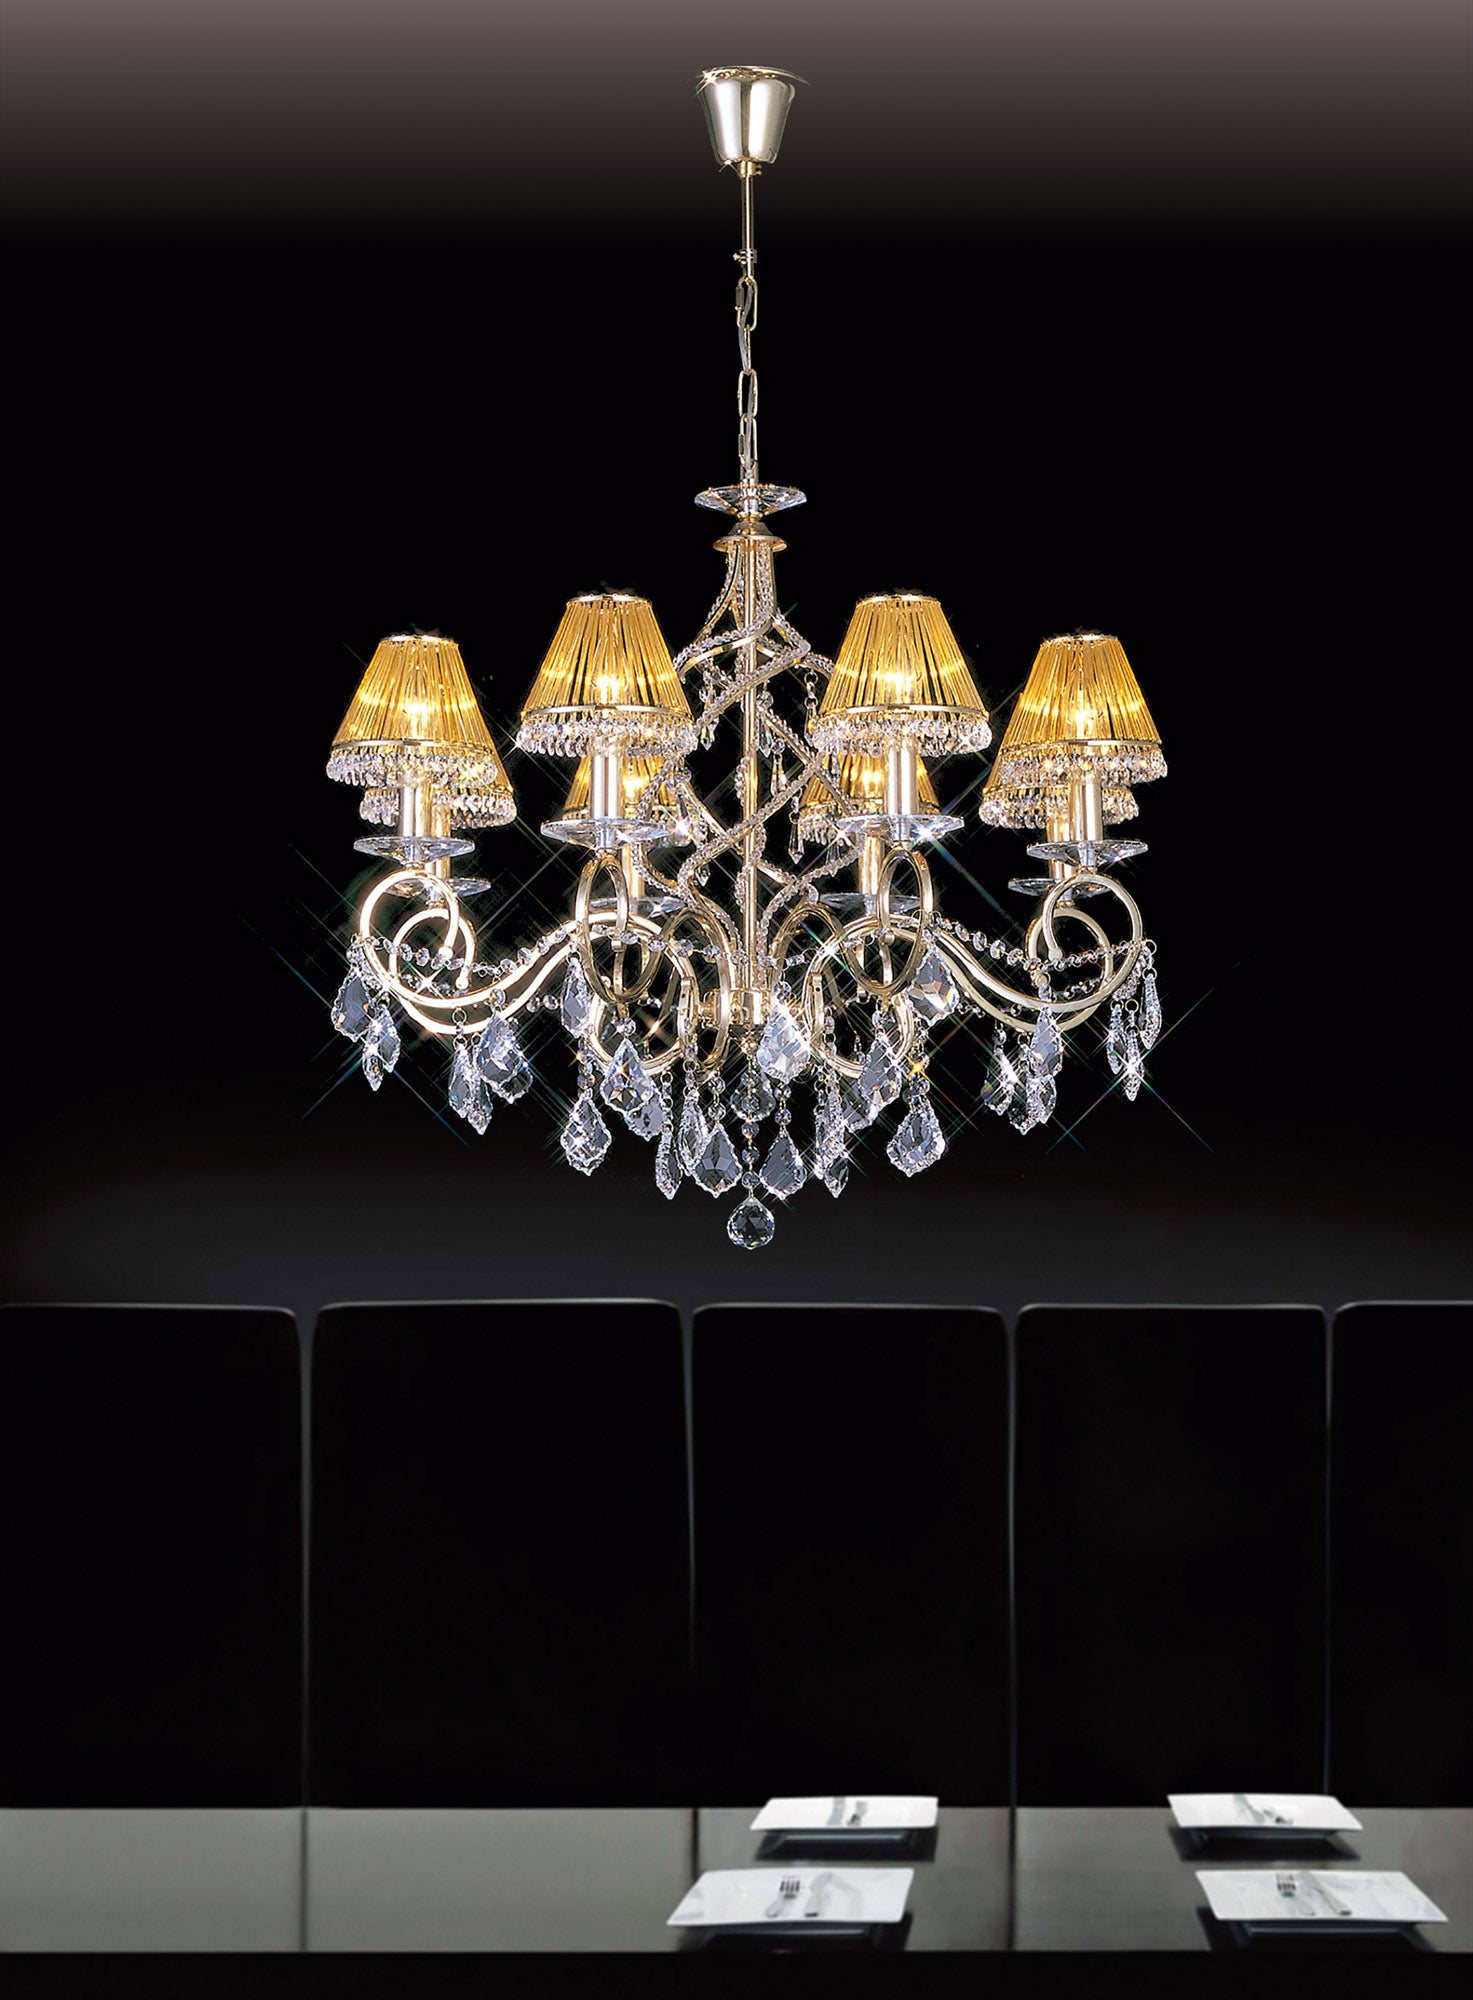 Torino Crystal 18 Light Chandelier by Diyas IL303212+6 with French Gold Frame